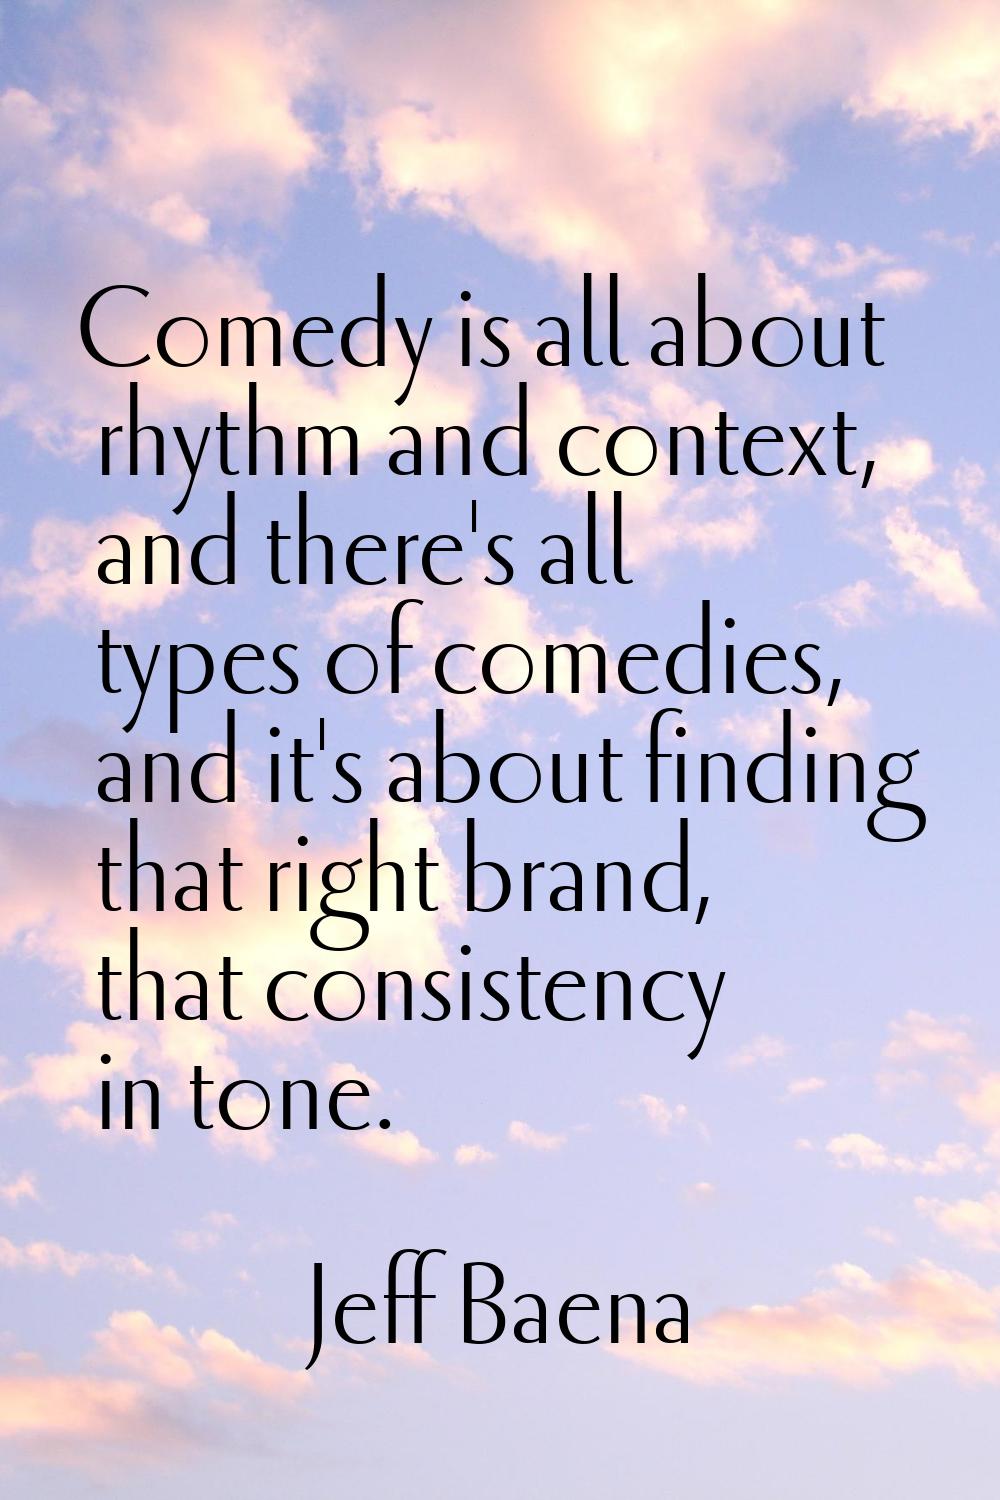 Comedy is all about rhythm and context, and there's all types of comedies, and it's about finding t